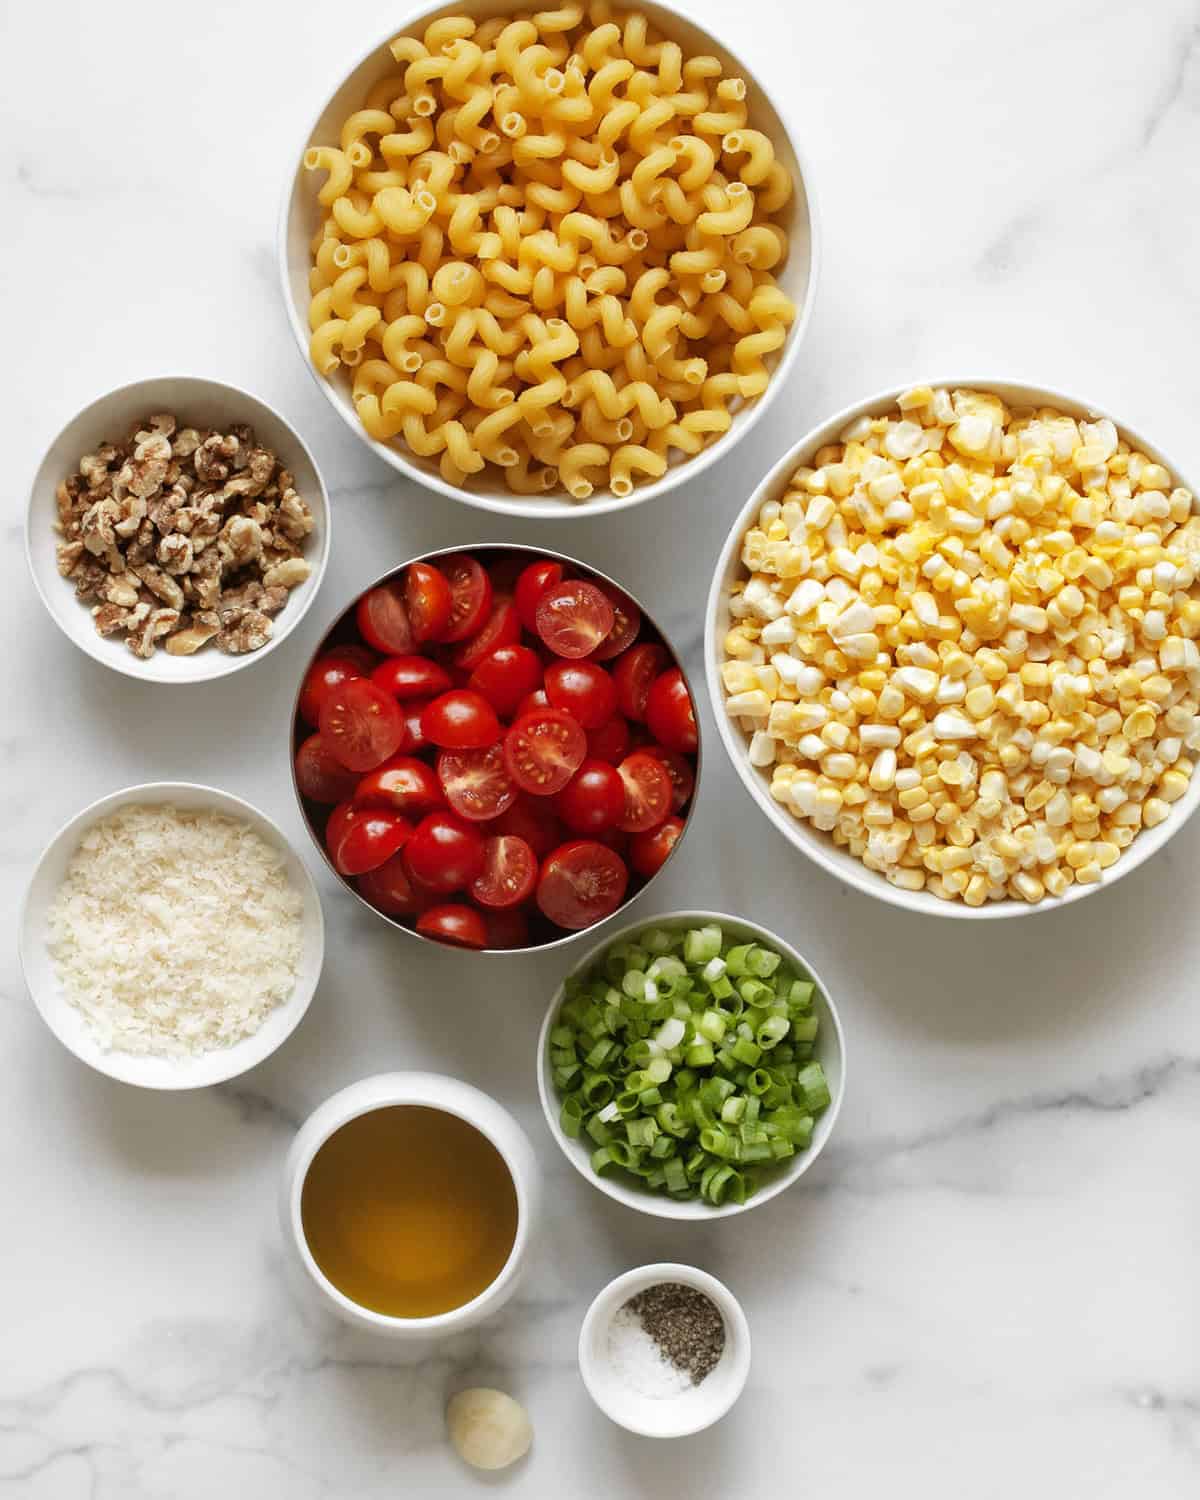 Ingredients including corn, tomatoes, walnuts, scallions, olive oil, parmesan, cavatappi, salt and pepper.